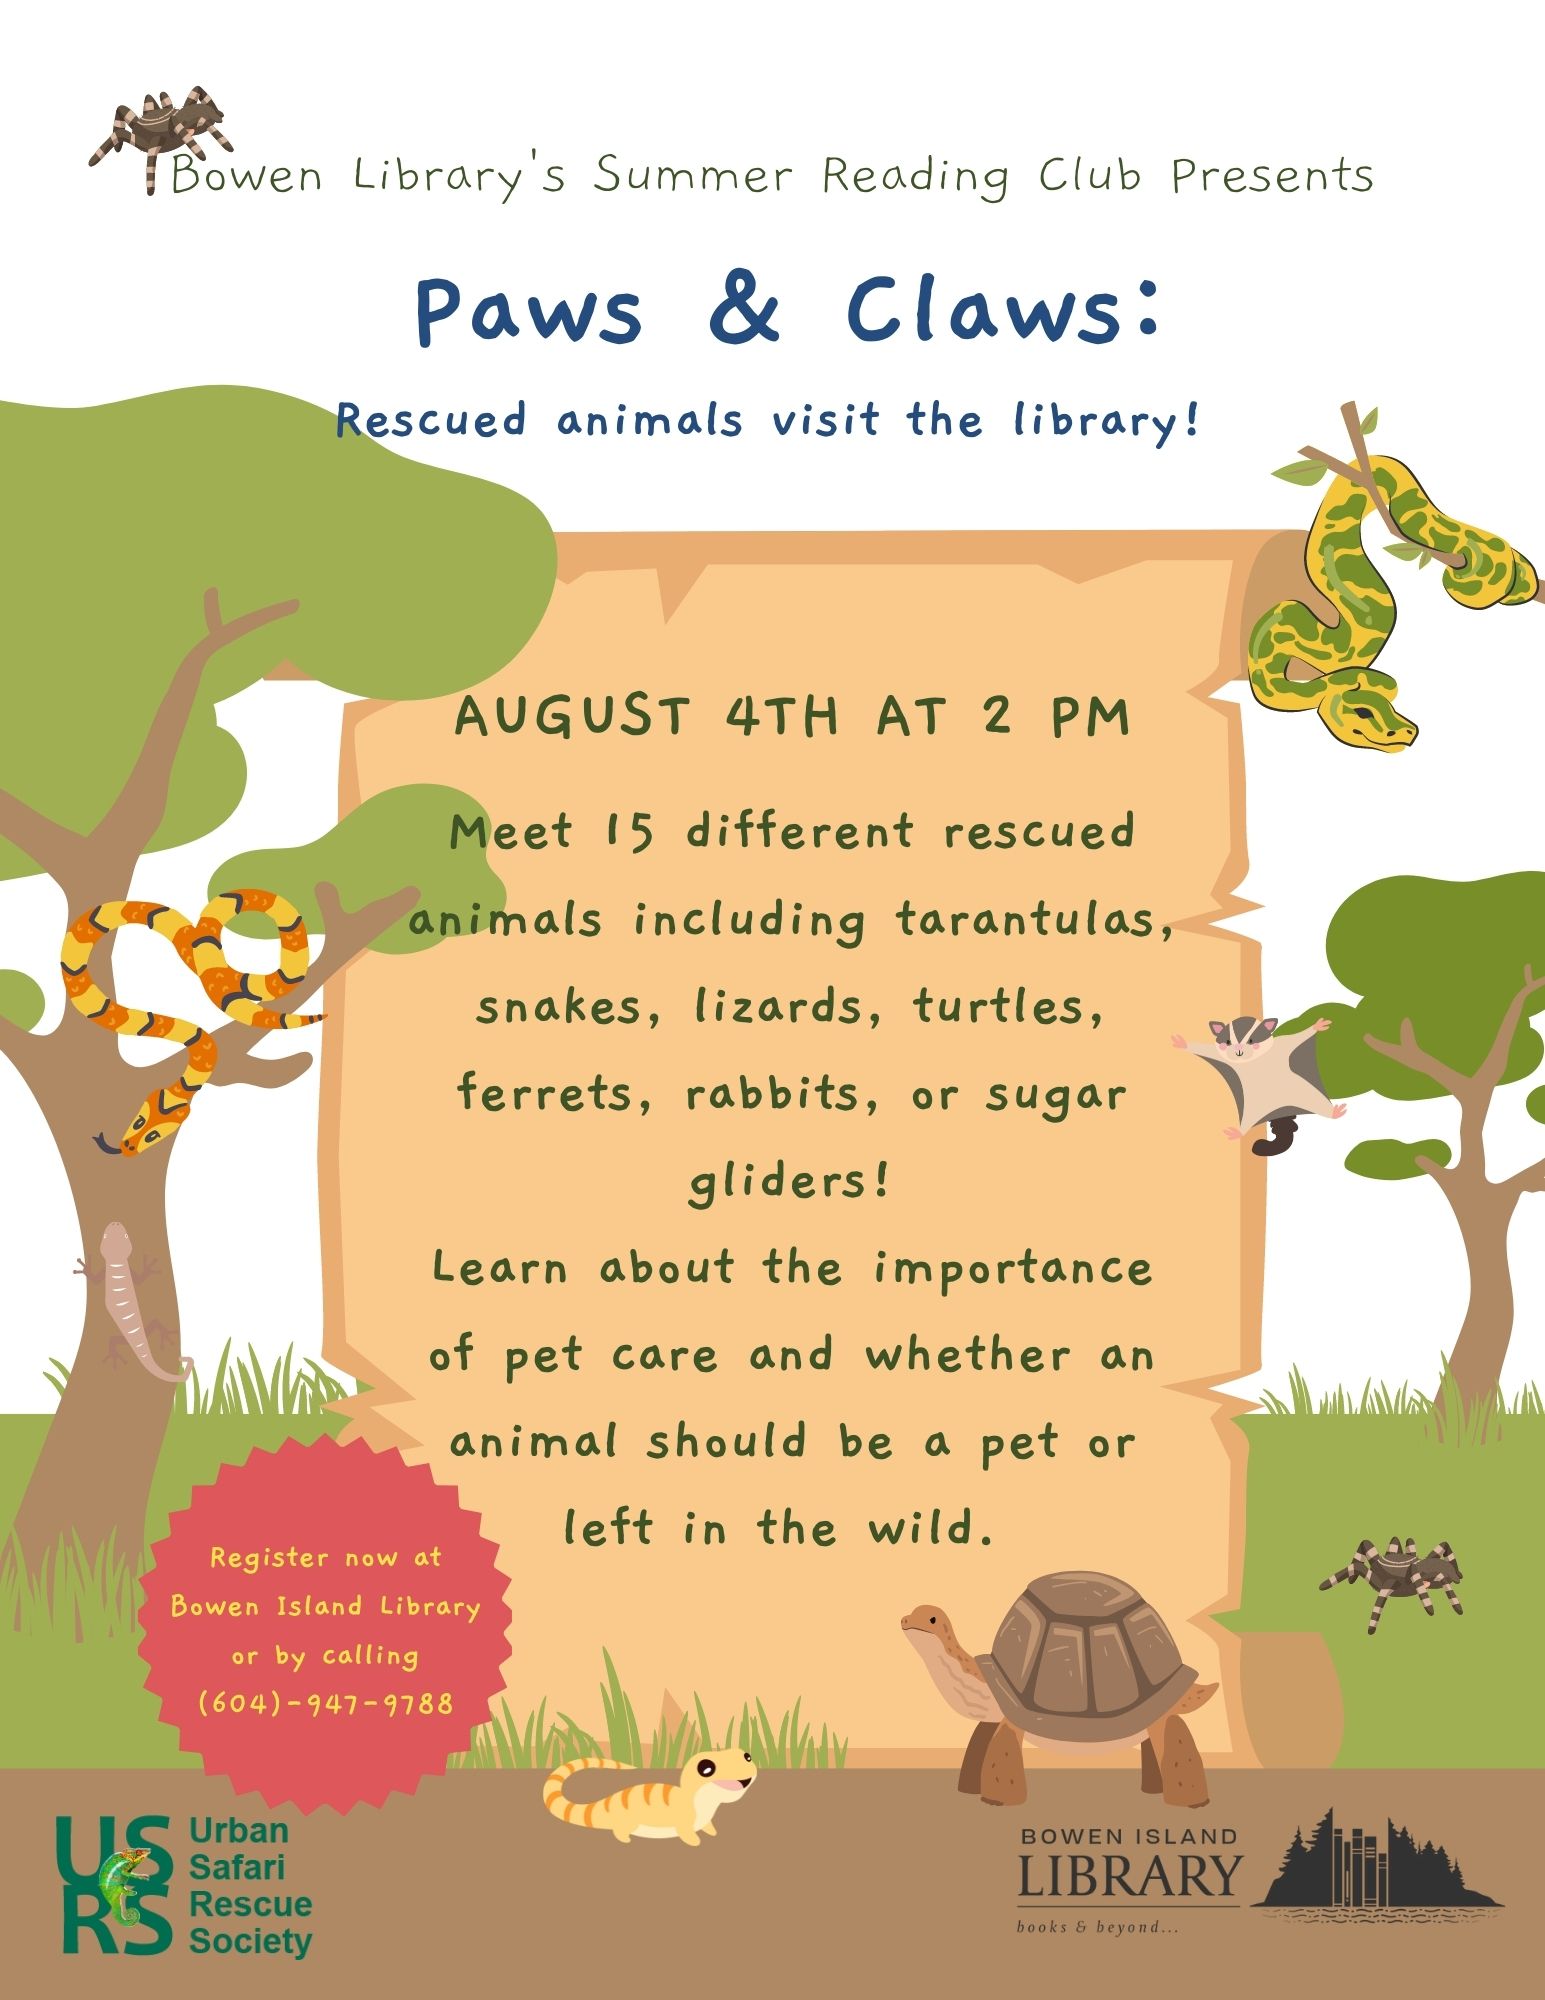 Bowen Island Public Library Presents Paws & Claws: Rescued animals visit the library! August 4th at 2 pm. Poster contains images of trees, snakes, tarantulas, lizards, a tortoise, and a sugar glider.